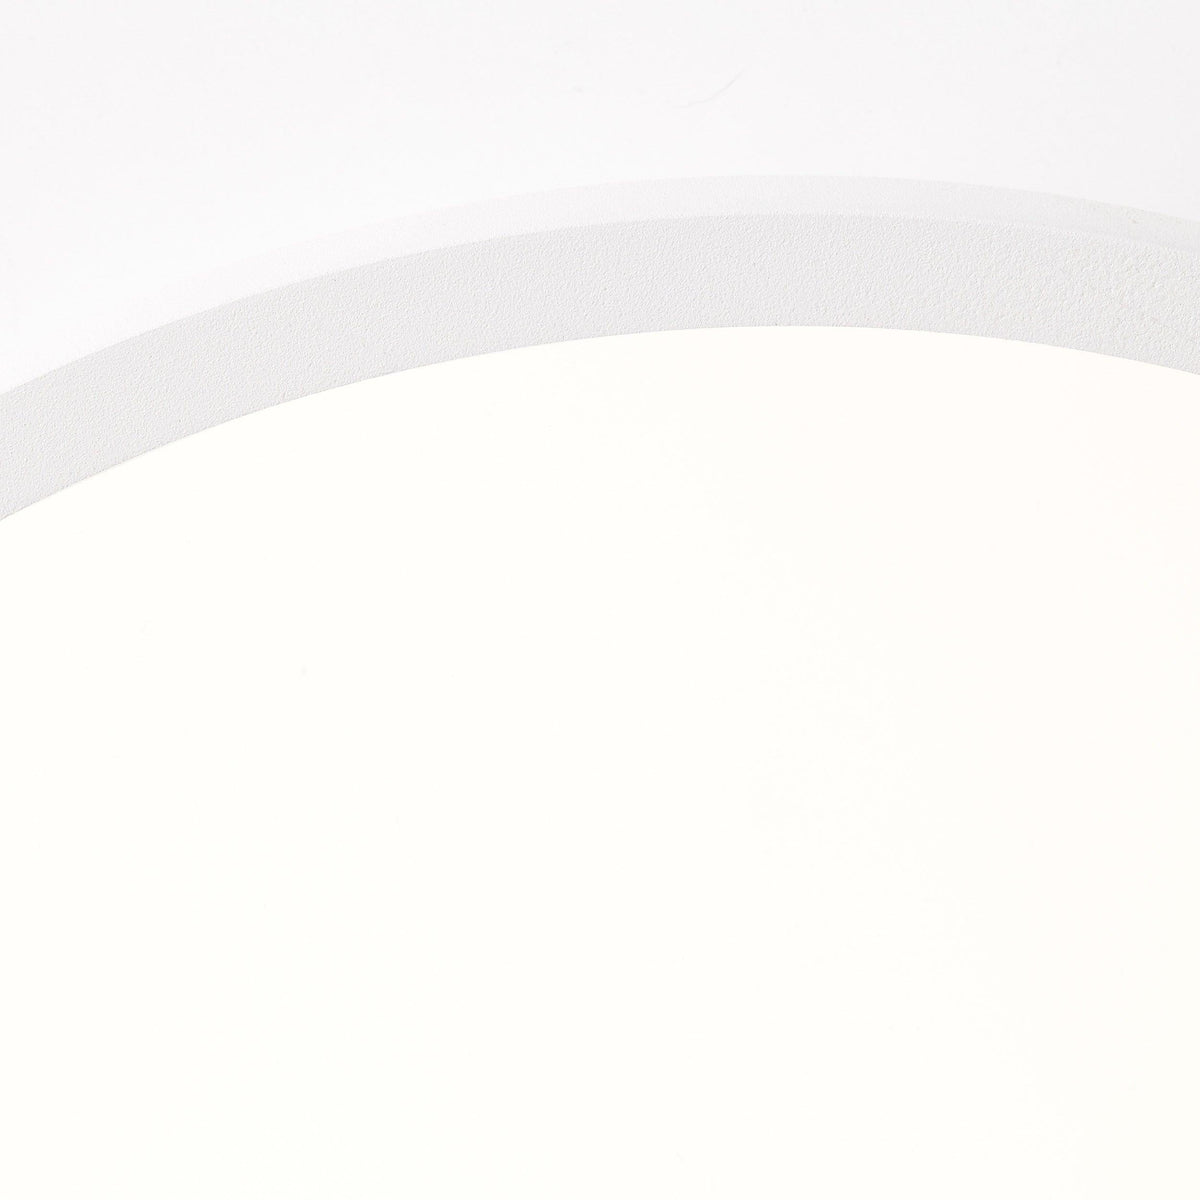 Brilliant 1 Light 24W Buffi LED Ceiling Panel - White | G96884A05 from DID Electrical - guaranteed Irish, guaranteed quality service. (6977603633340)